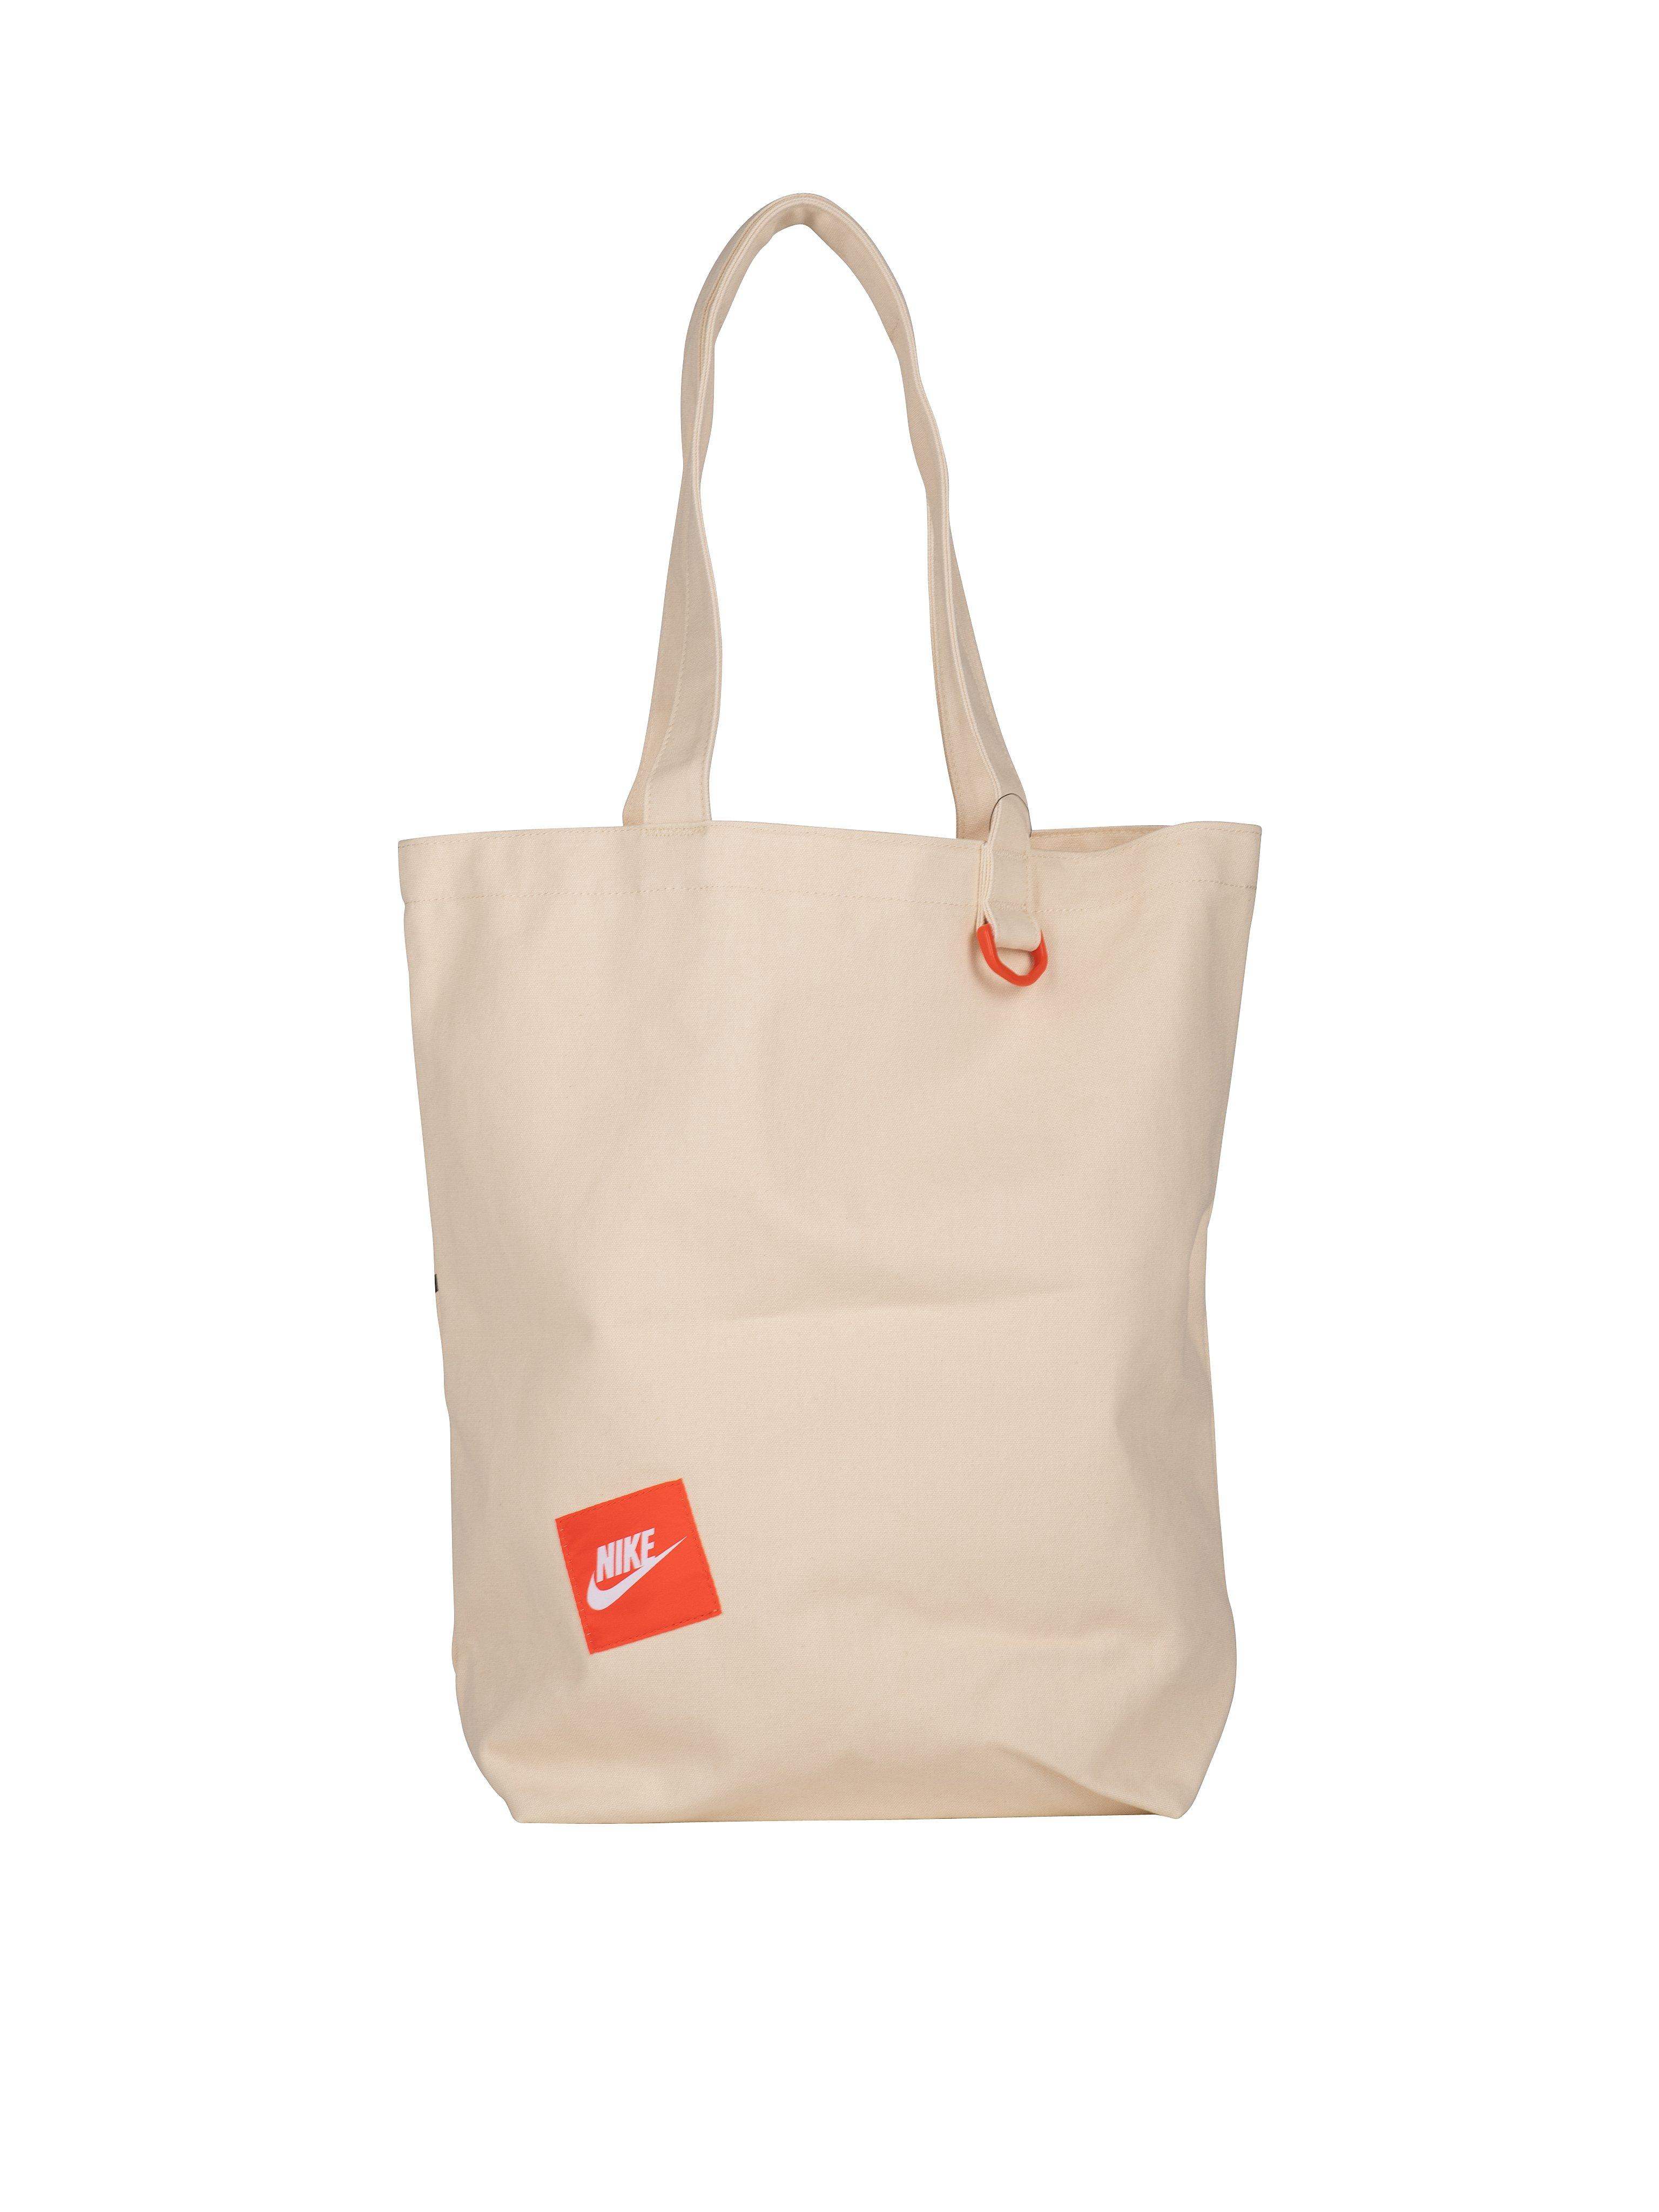 Nike Nk Heritage Tote Gfx in Natural 